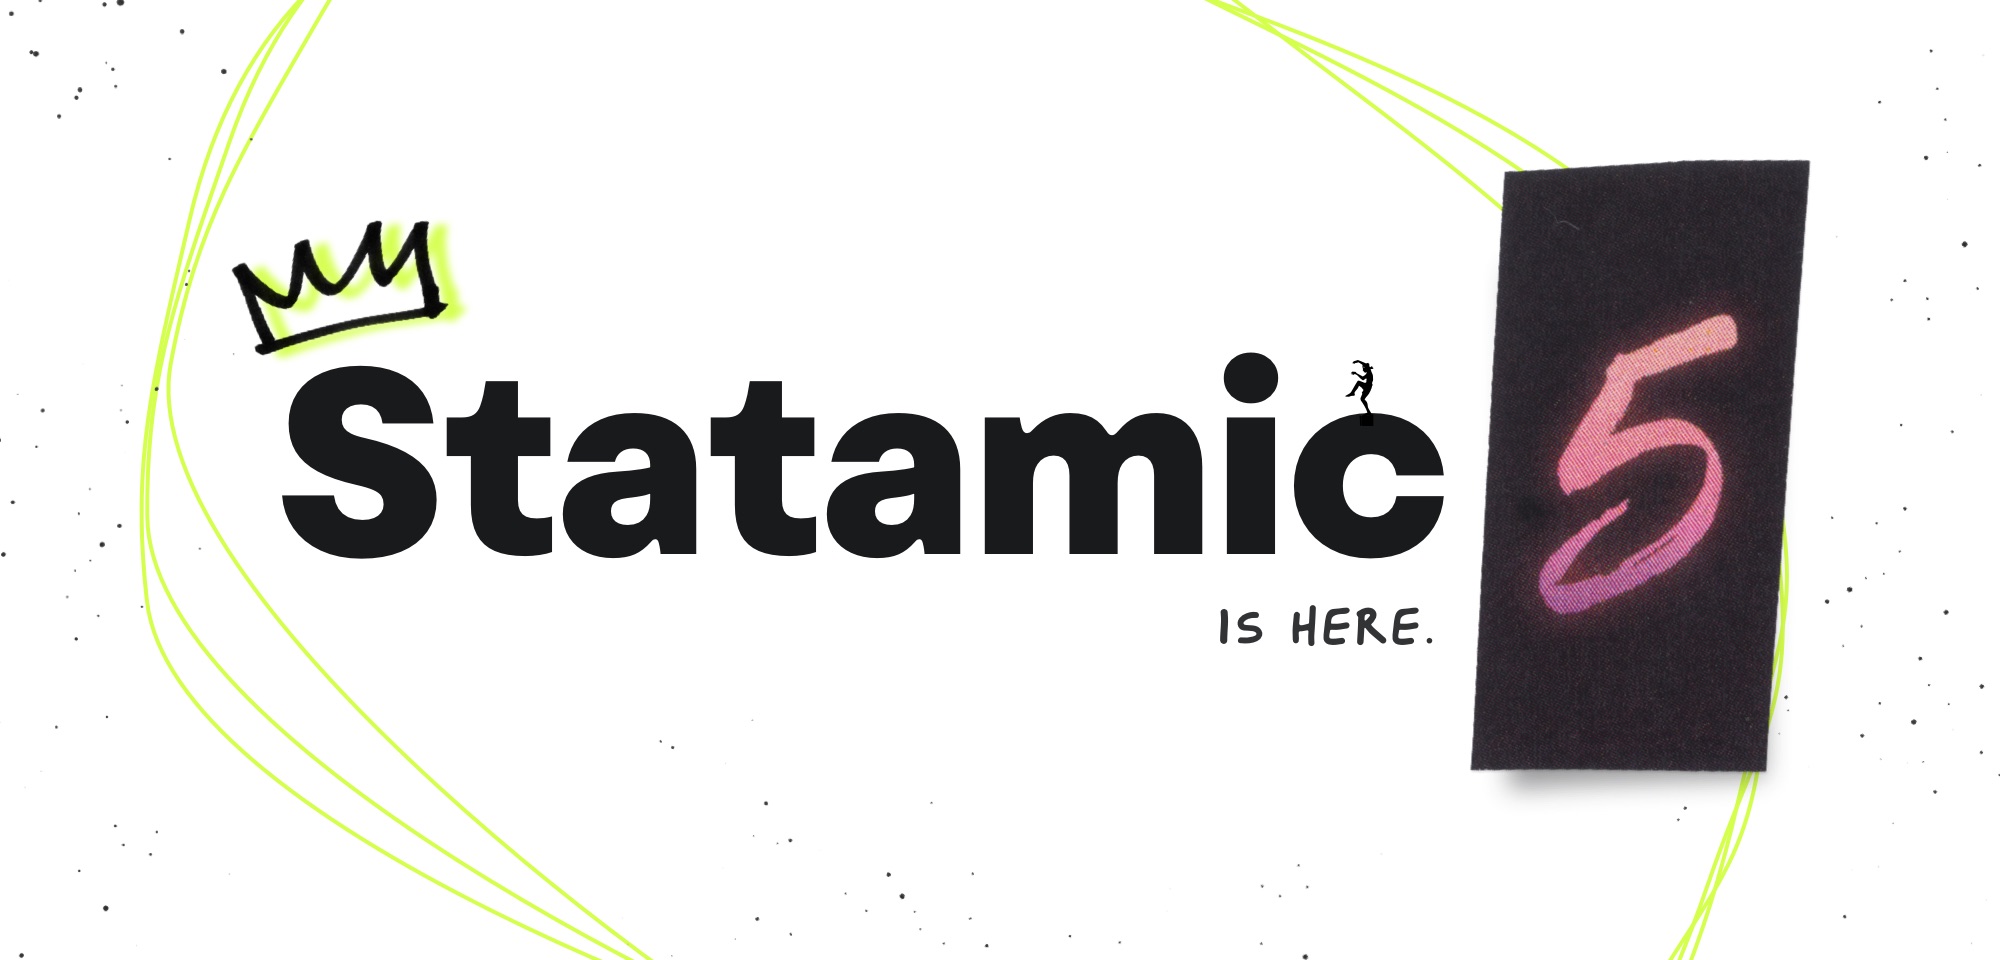 Statamic 5 is here.